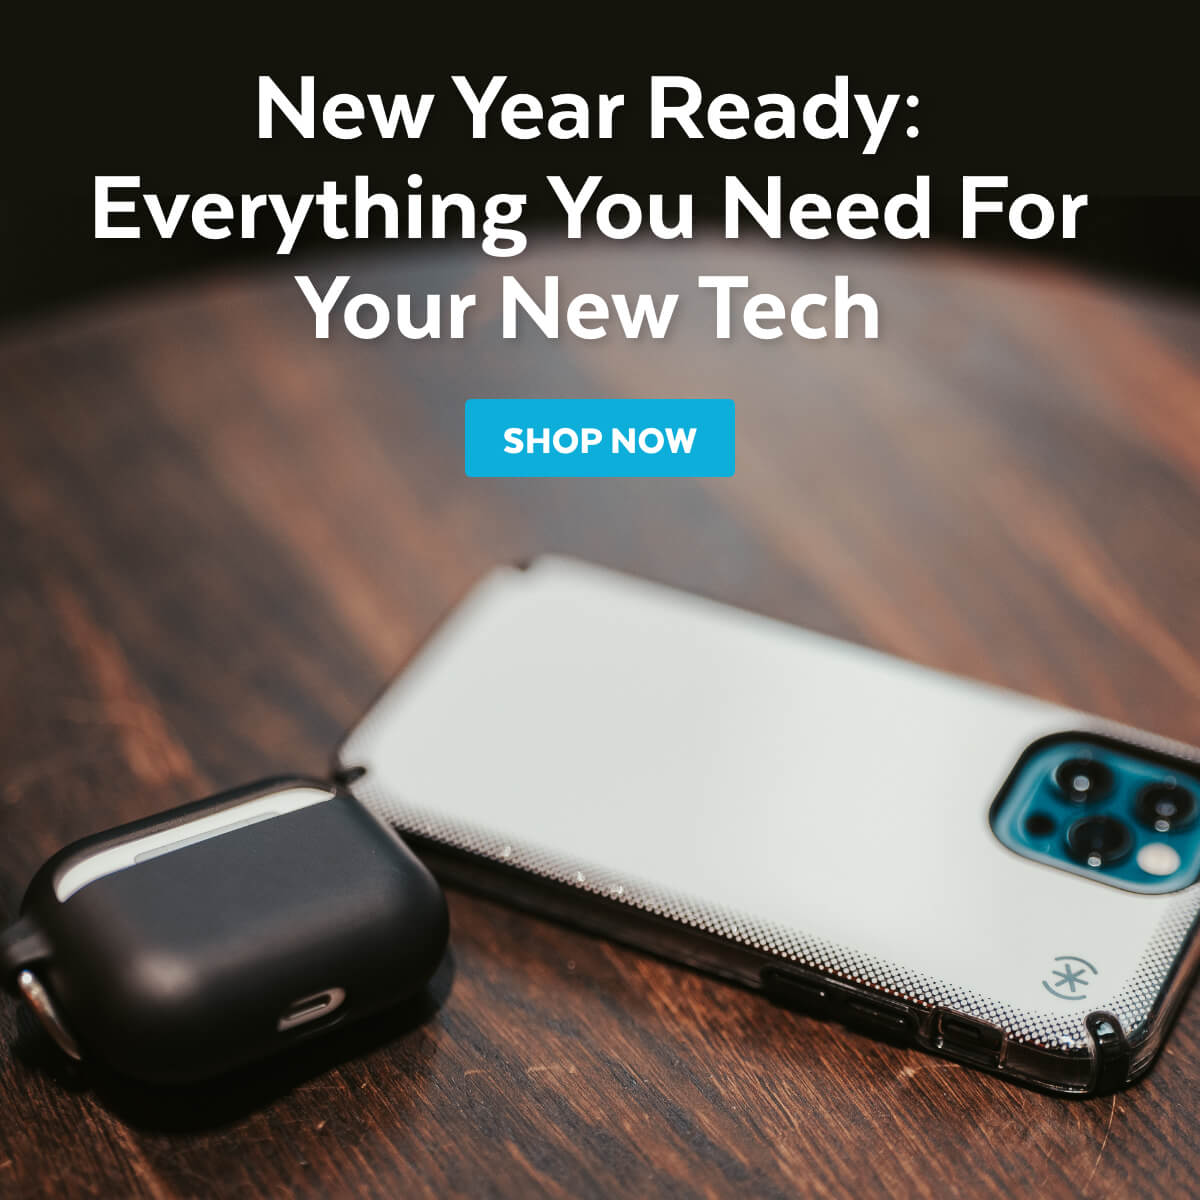 New Year Ready: Everything You Need for Your New Tech. Shop now.